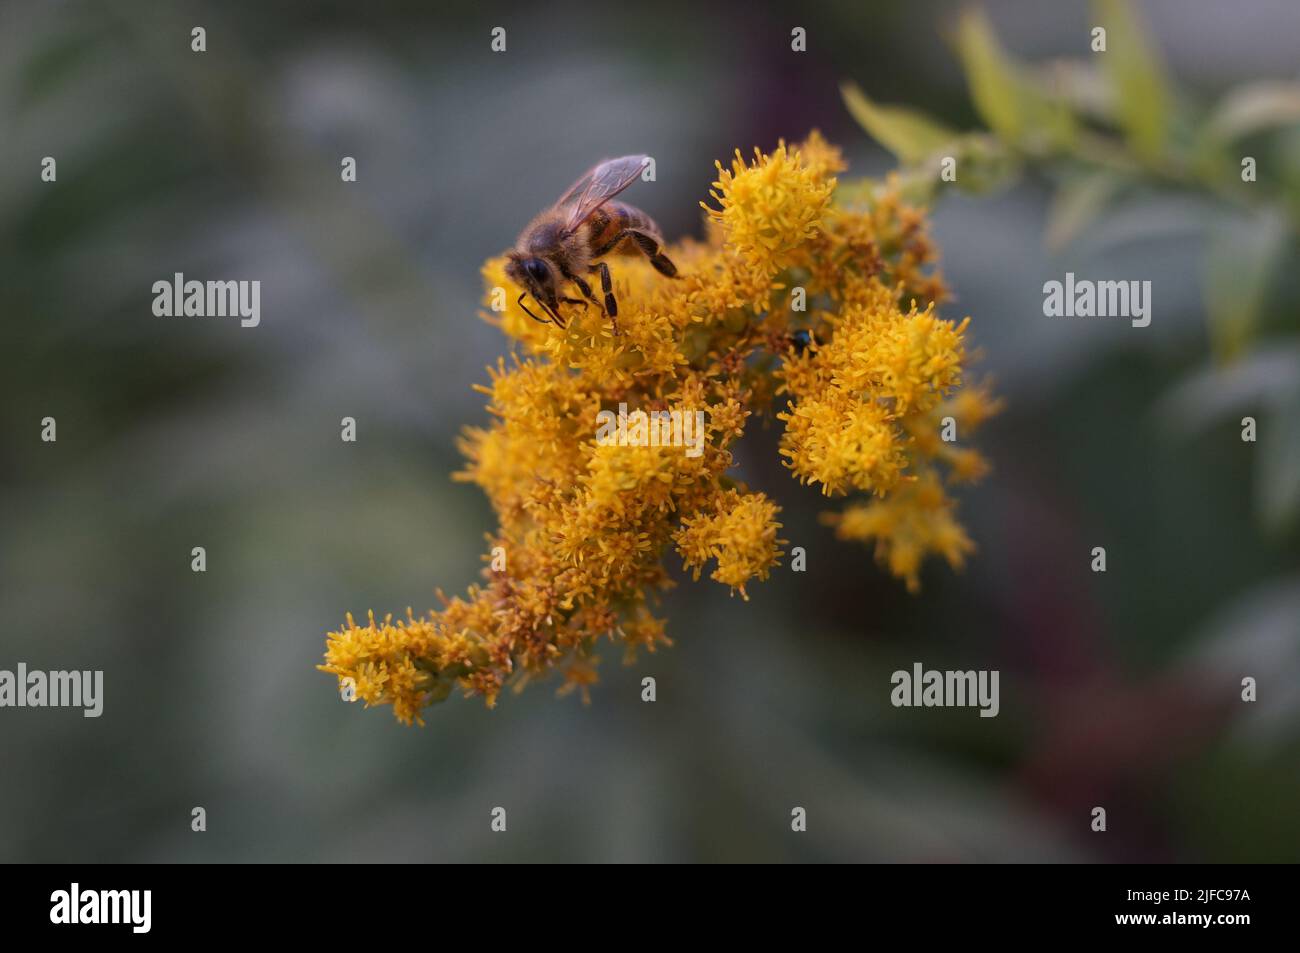 A closeup of a bee on a goldenrod flower against a blurred background Stock Photo